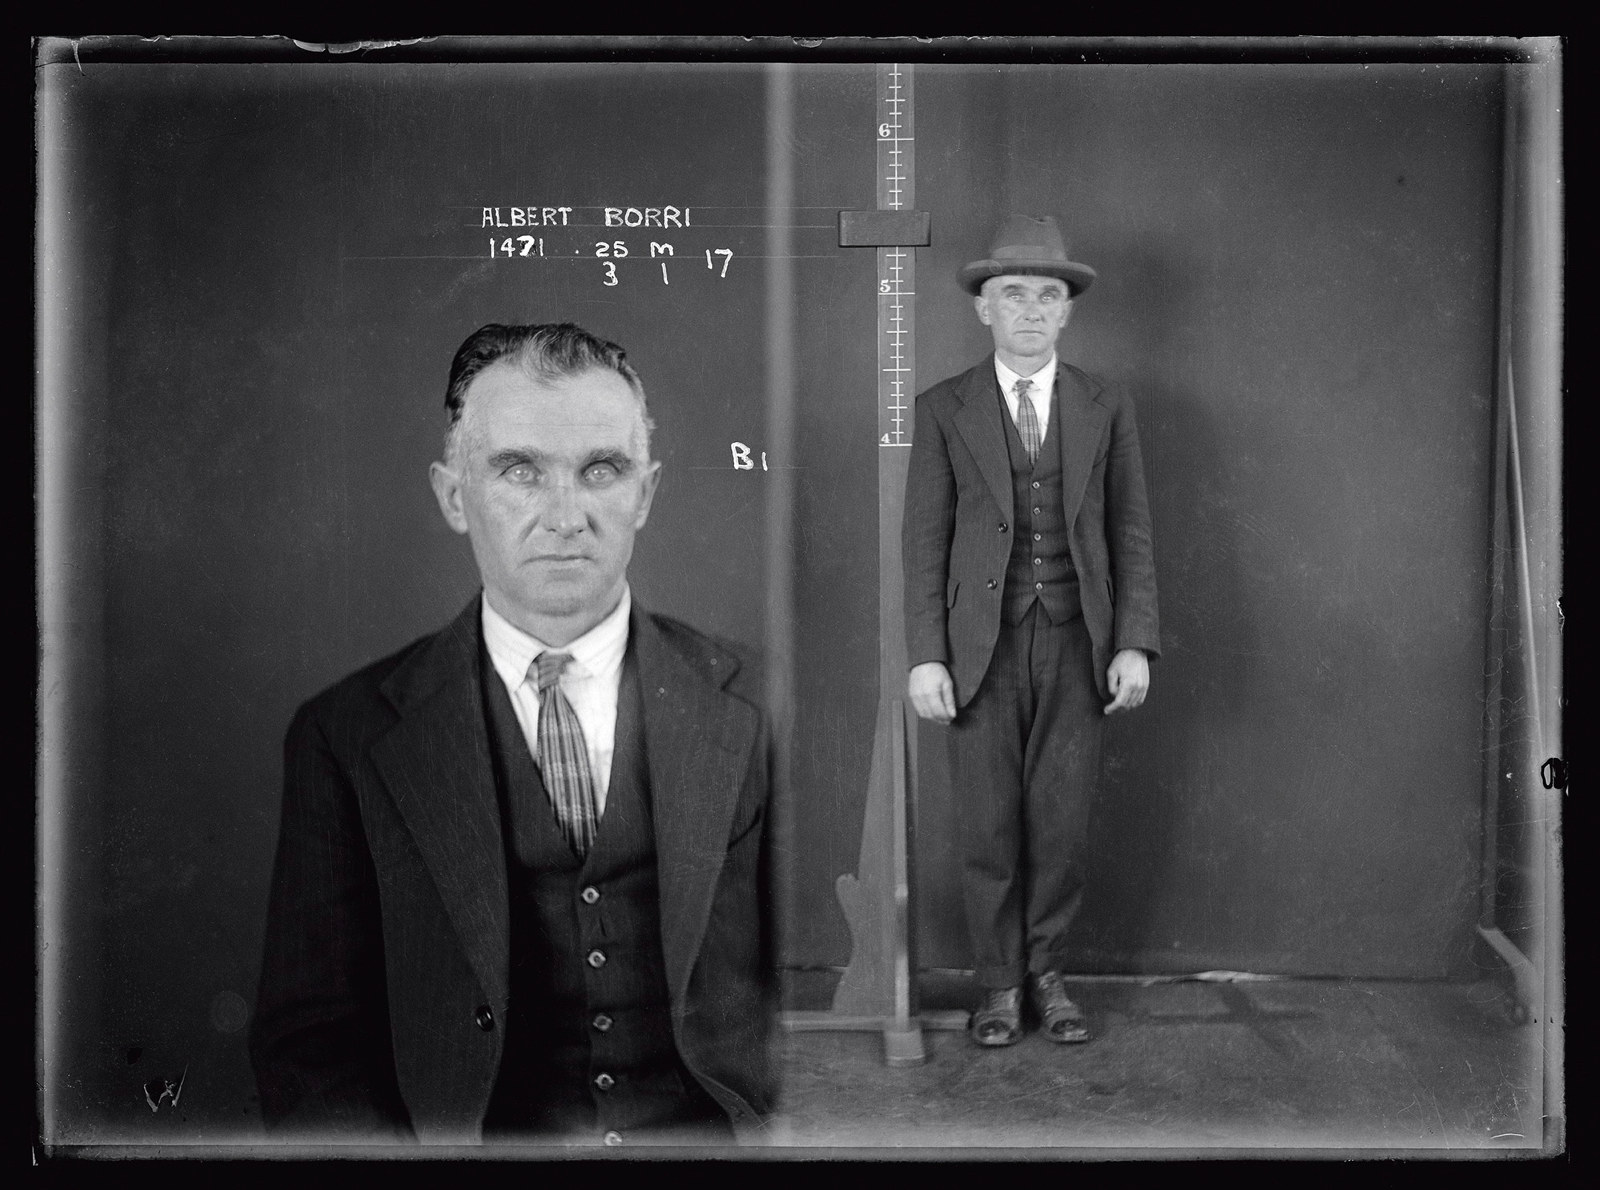 Dual mugshot in black and white; man seated and then man standing, with hat on.